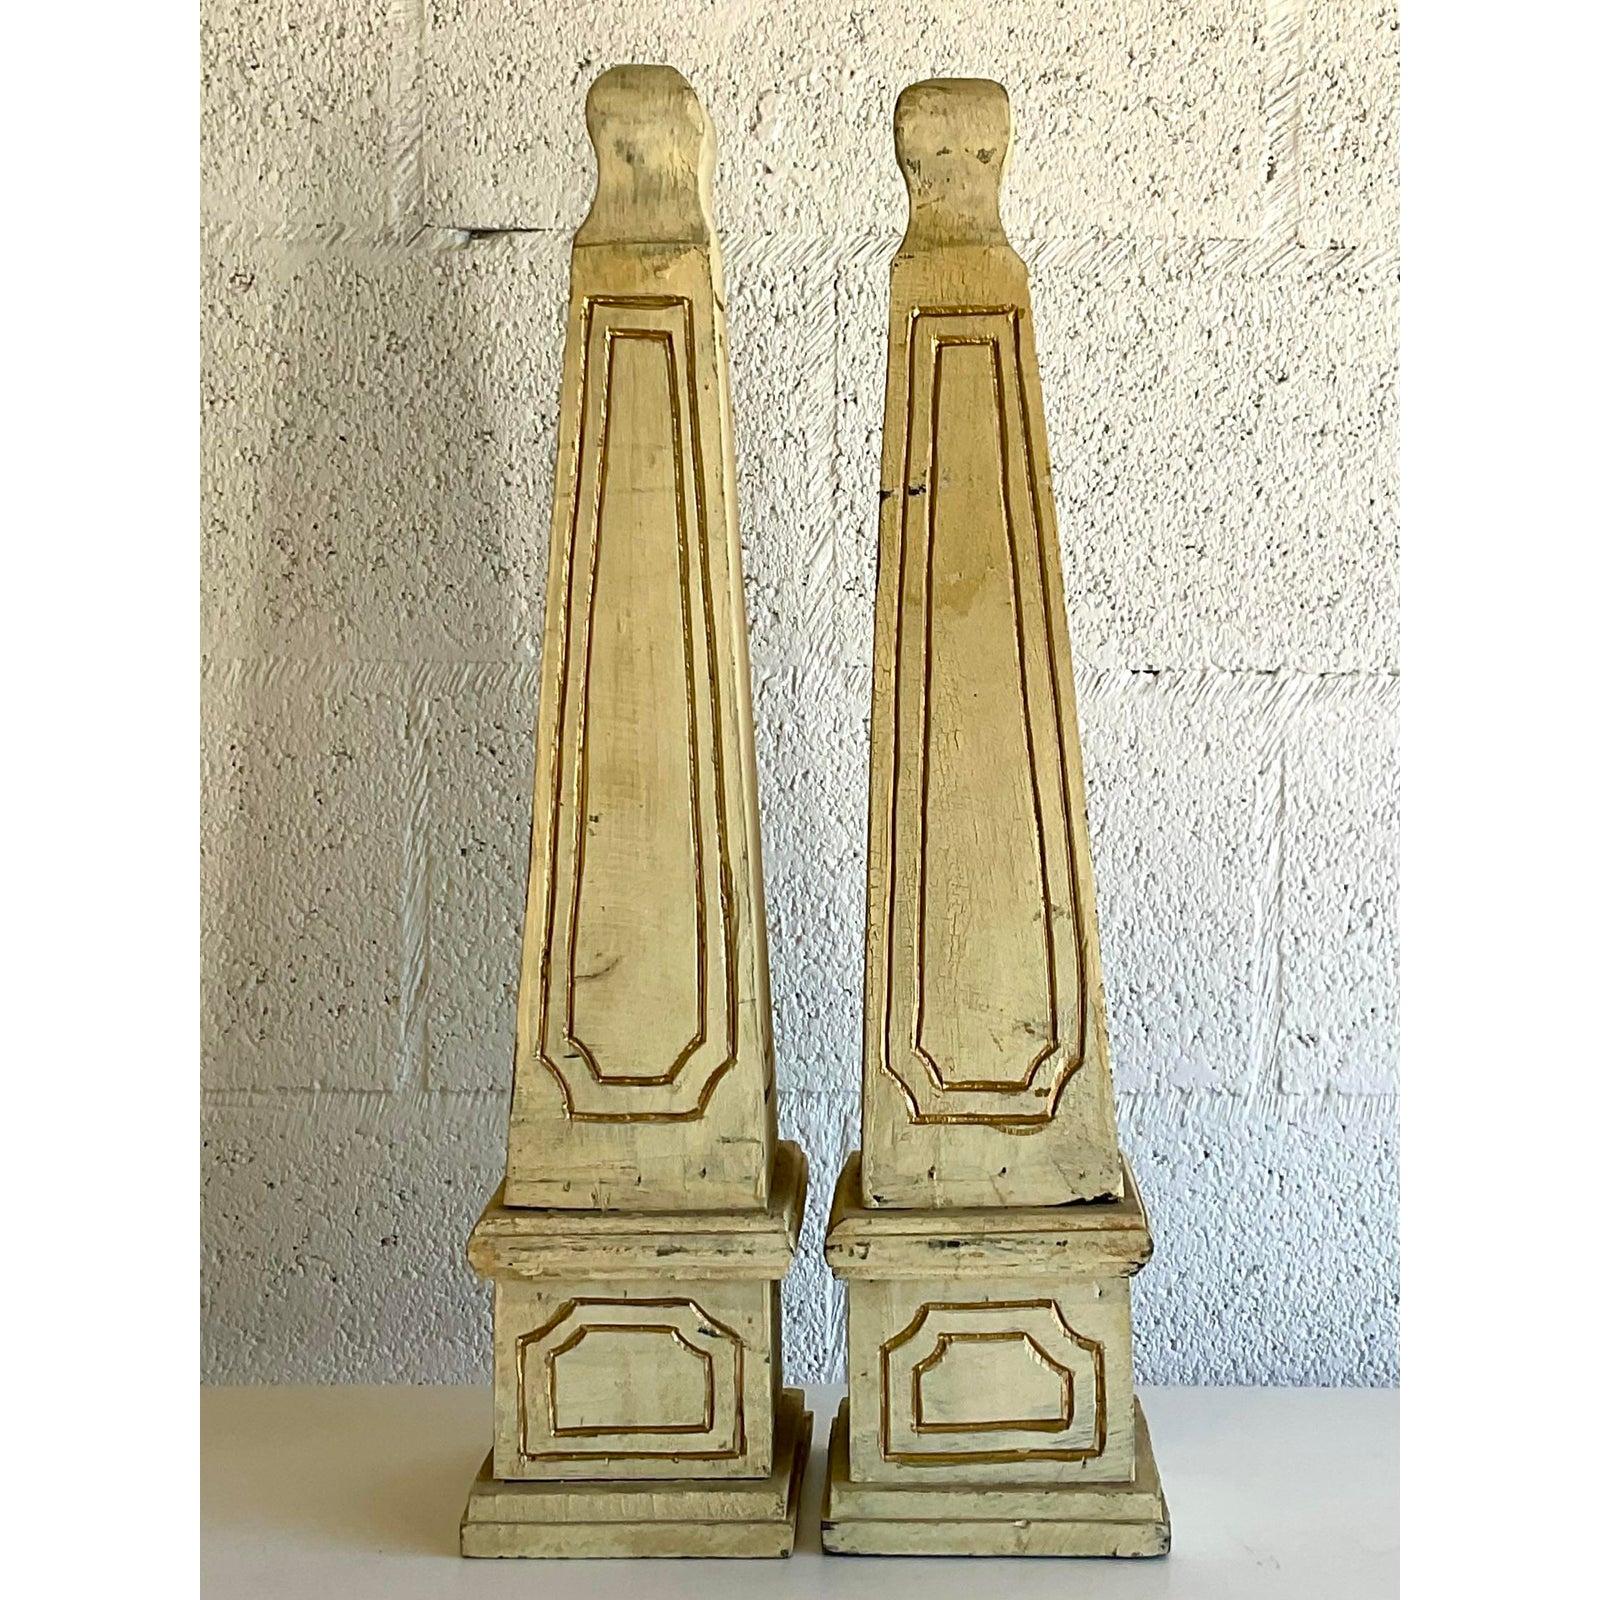 A fantastic pair of Boho Chic obelisks. Hand carved detail on solid wood construction. Gilt detail on the routed lines. An artisan approach to an iconic Regency staple of design. Acquired from a Palm Beach estate.